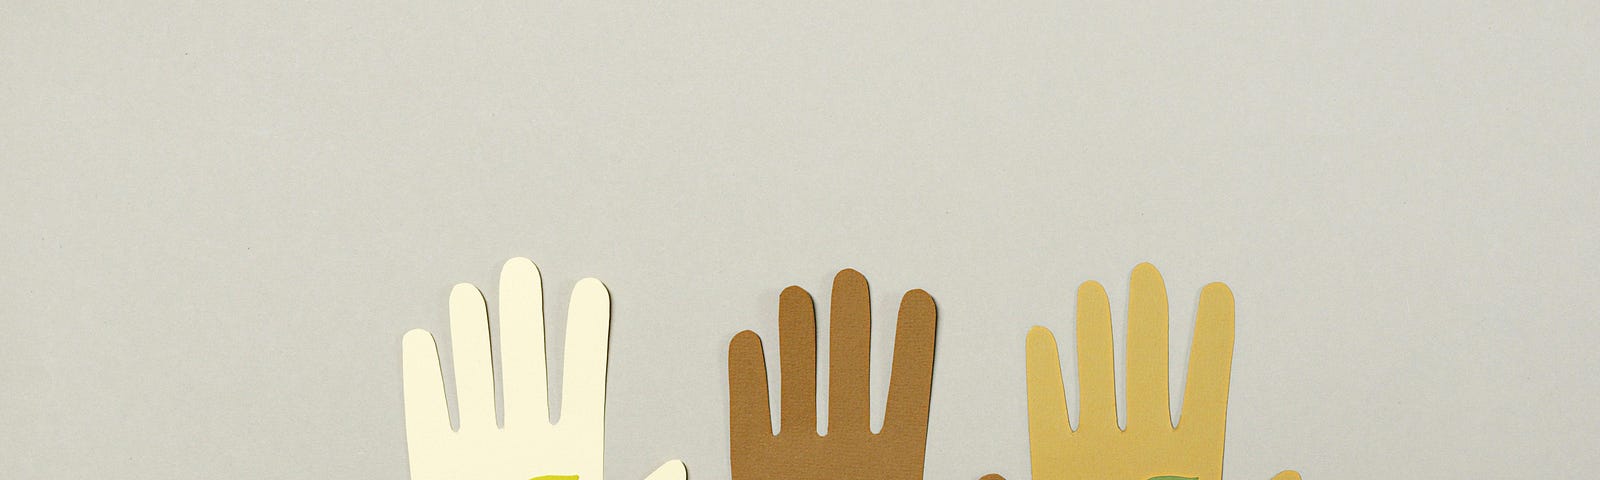 Paper cutouts of three hands in different skin tones with plants and a heart in the palms.